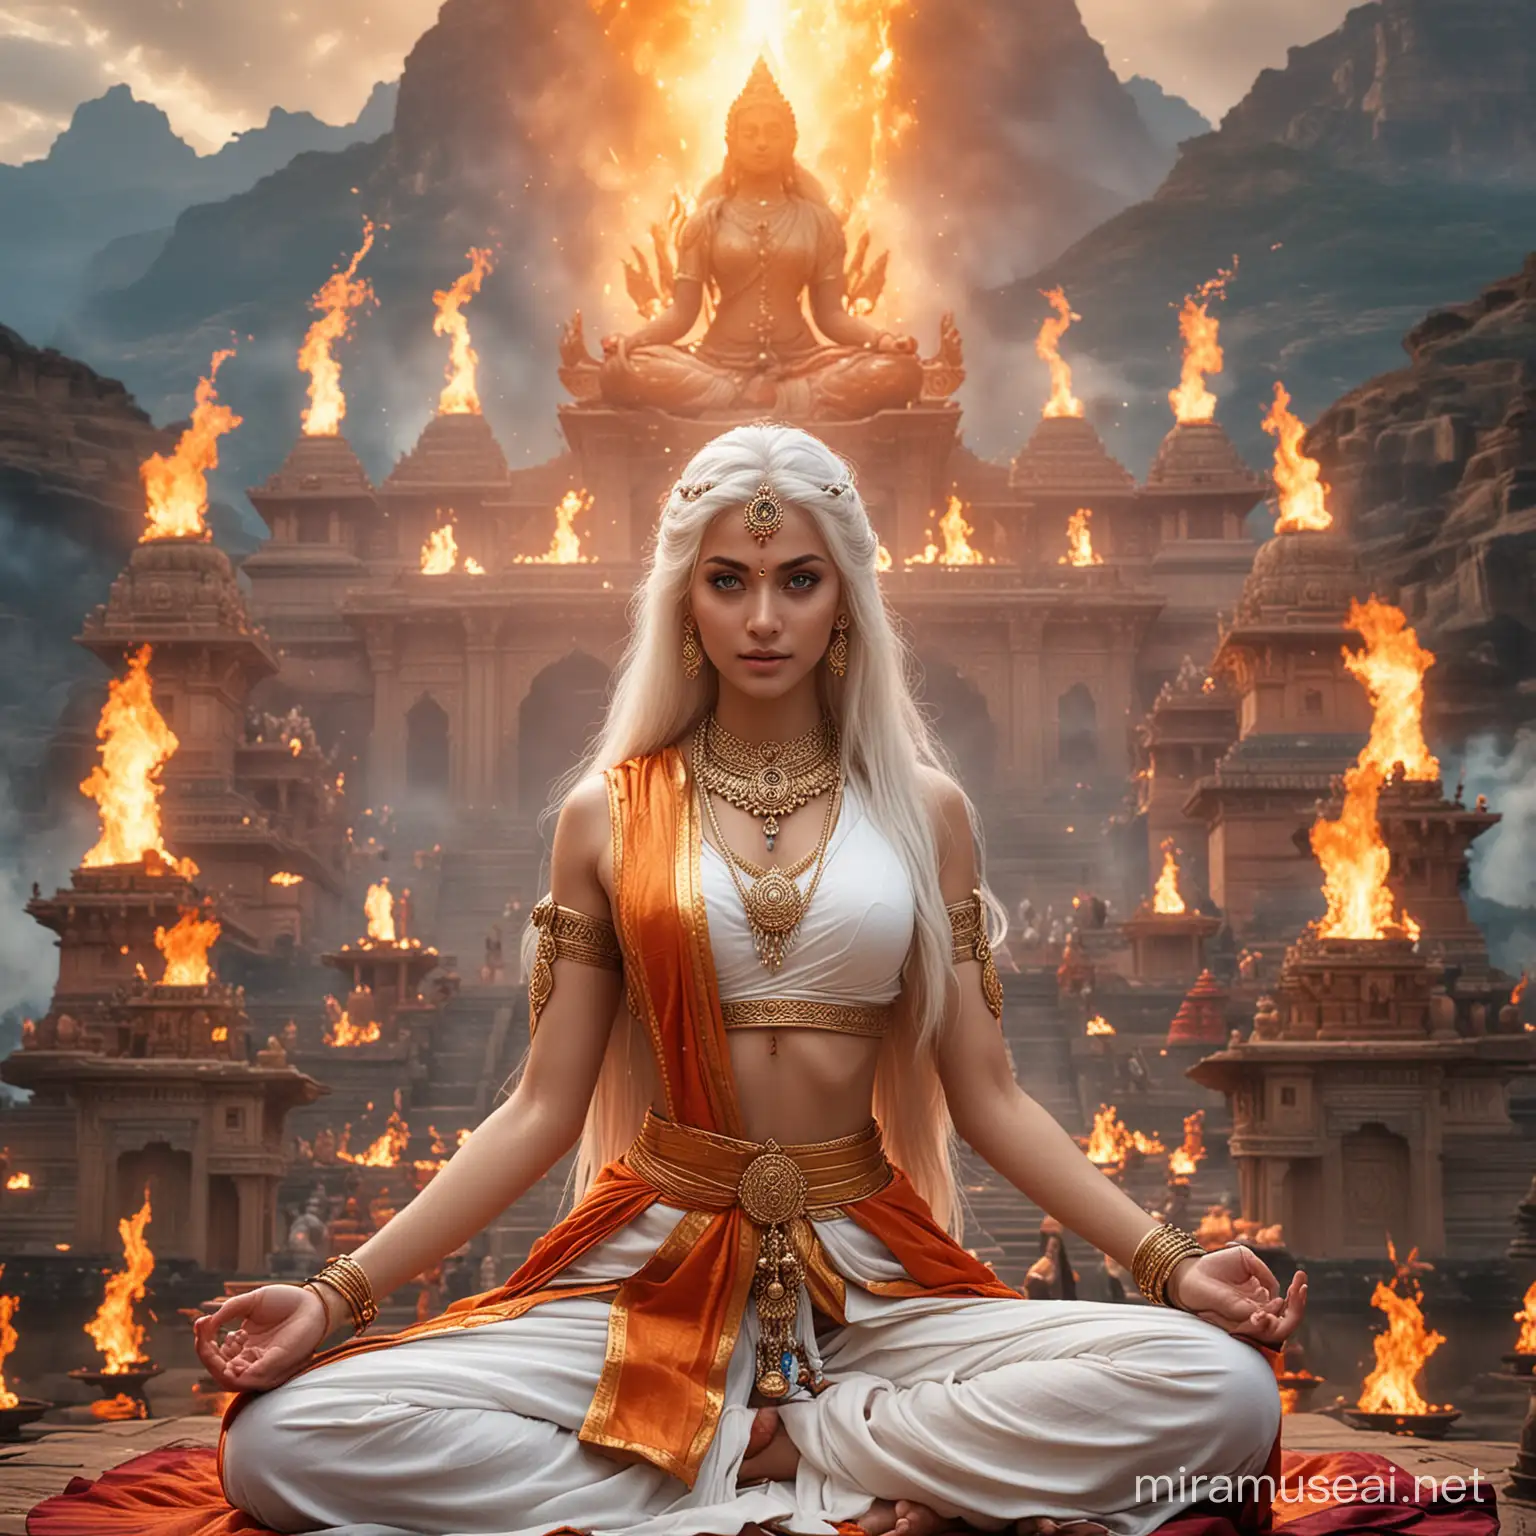 Fiery Empress Goddess in Lotus Pose Amidst Hindu Deities and Palace